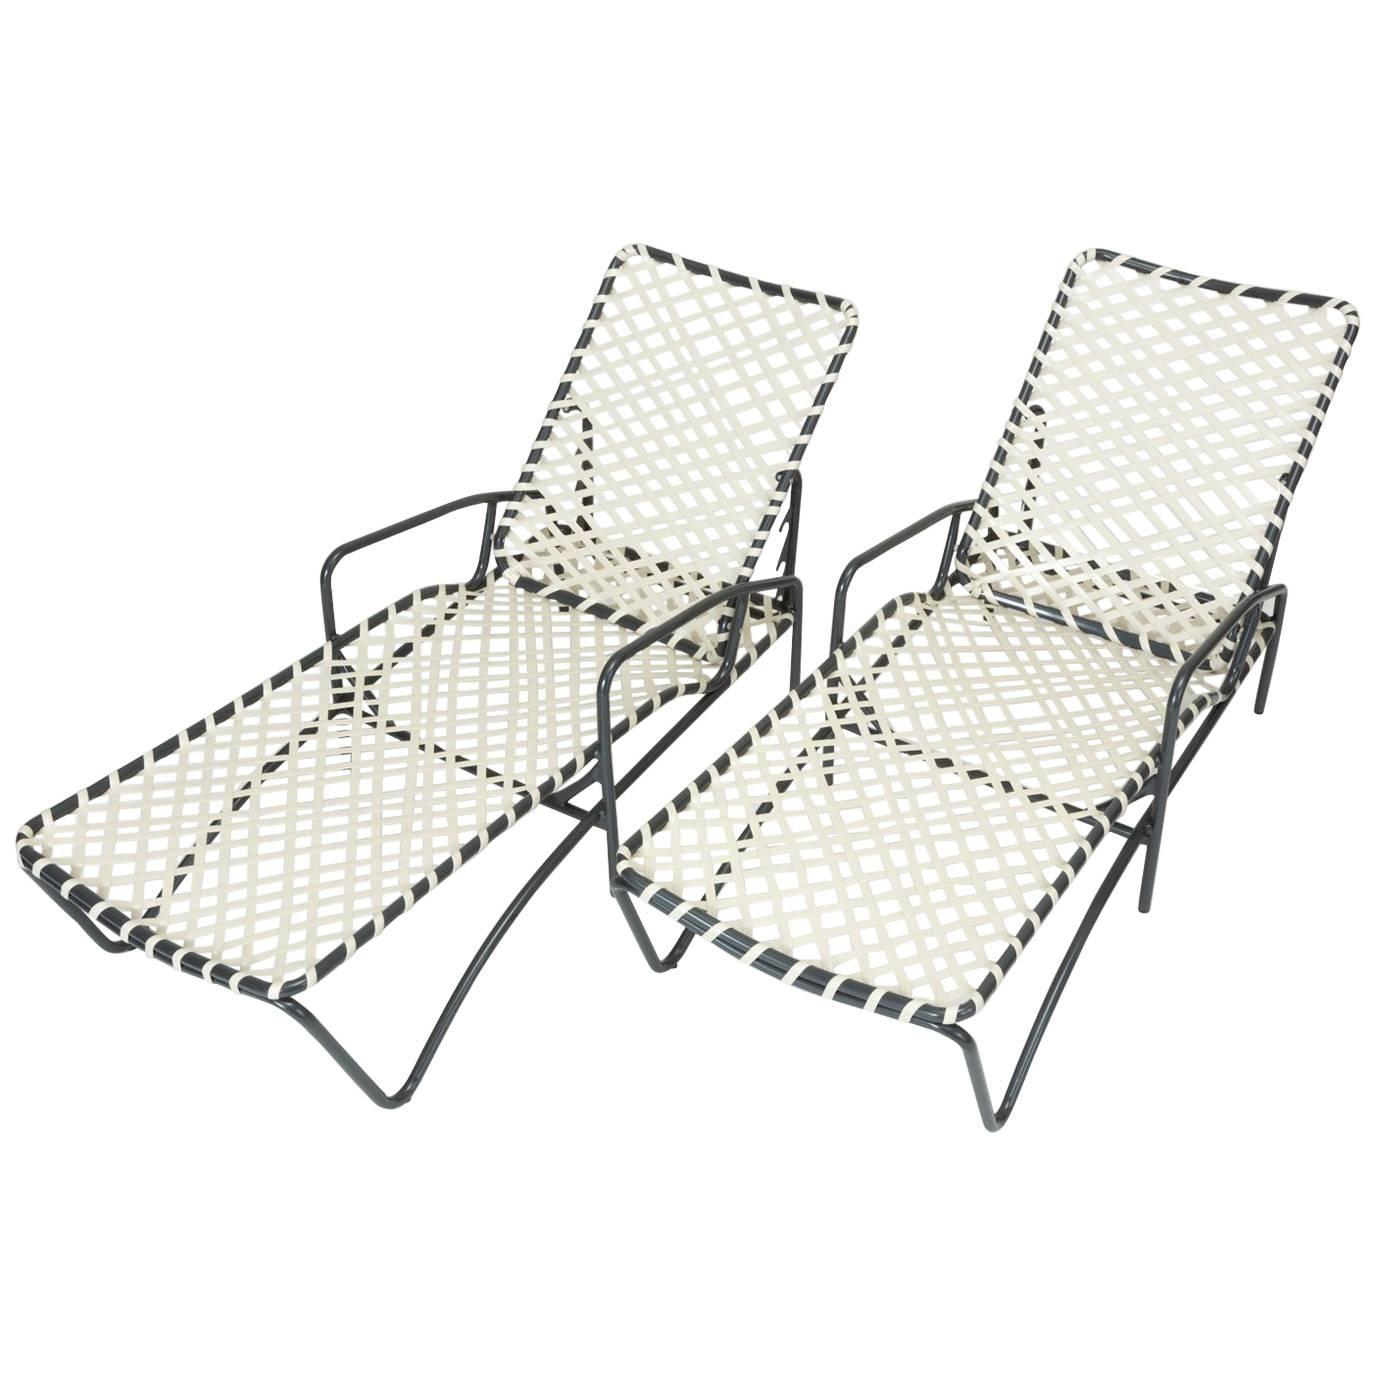 Pair of Brown Jordan “Tamiami” Adjustable Patio Chaise Lounges